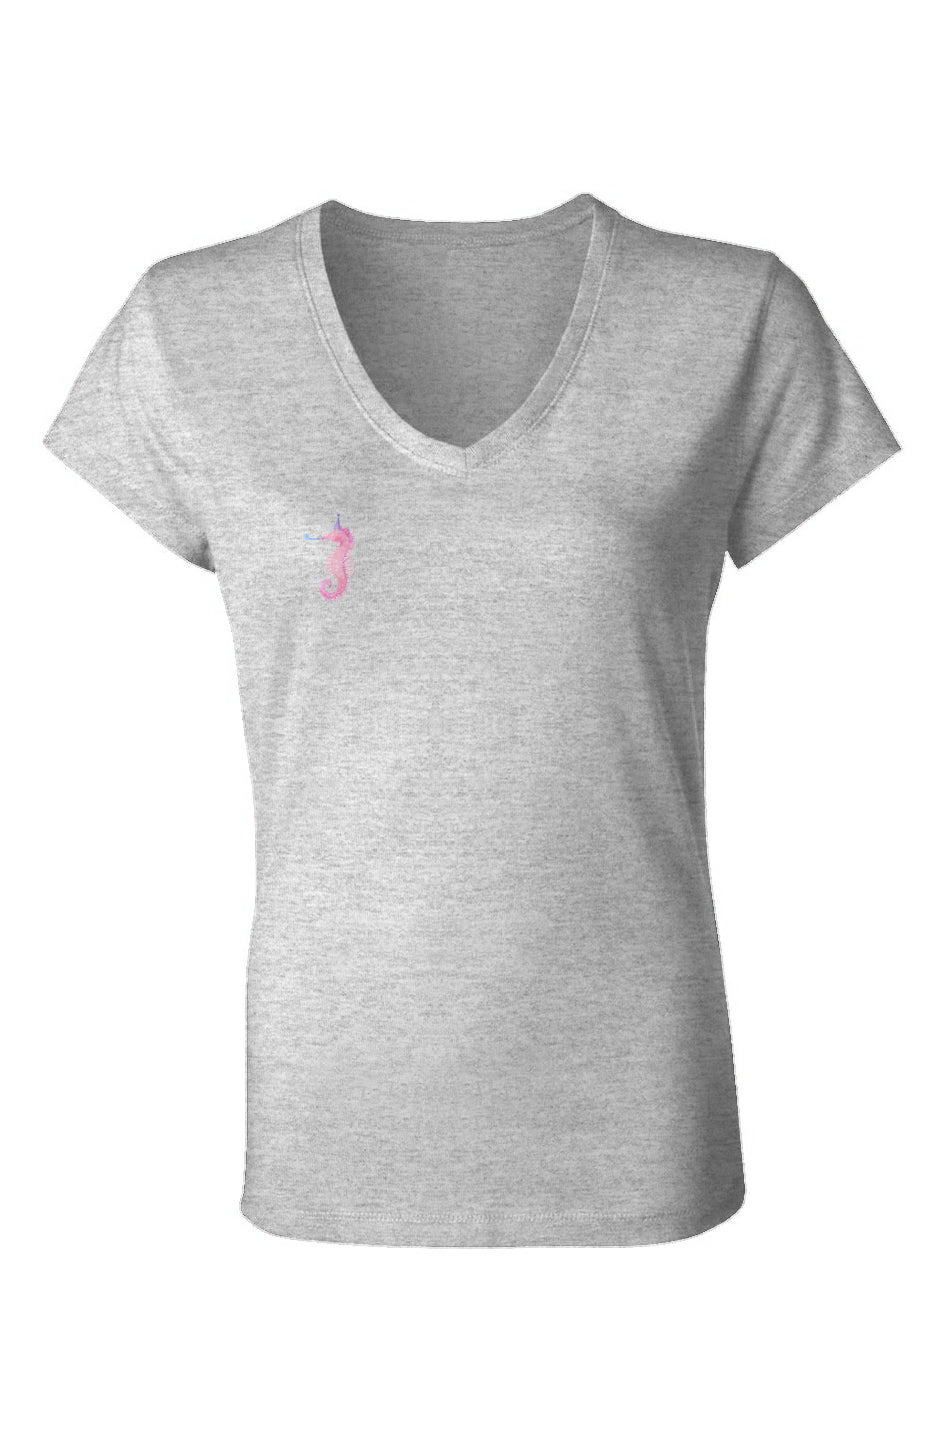 Mermaid Party Seahorse - Ladies Jersey V-Neck T-Shirt